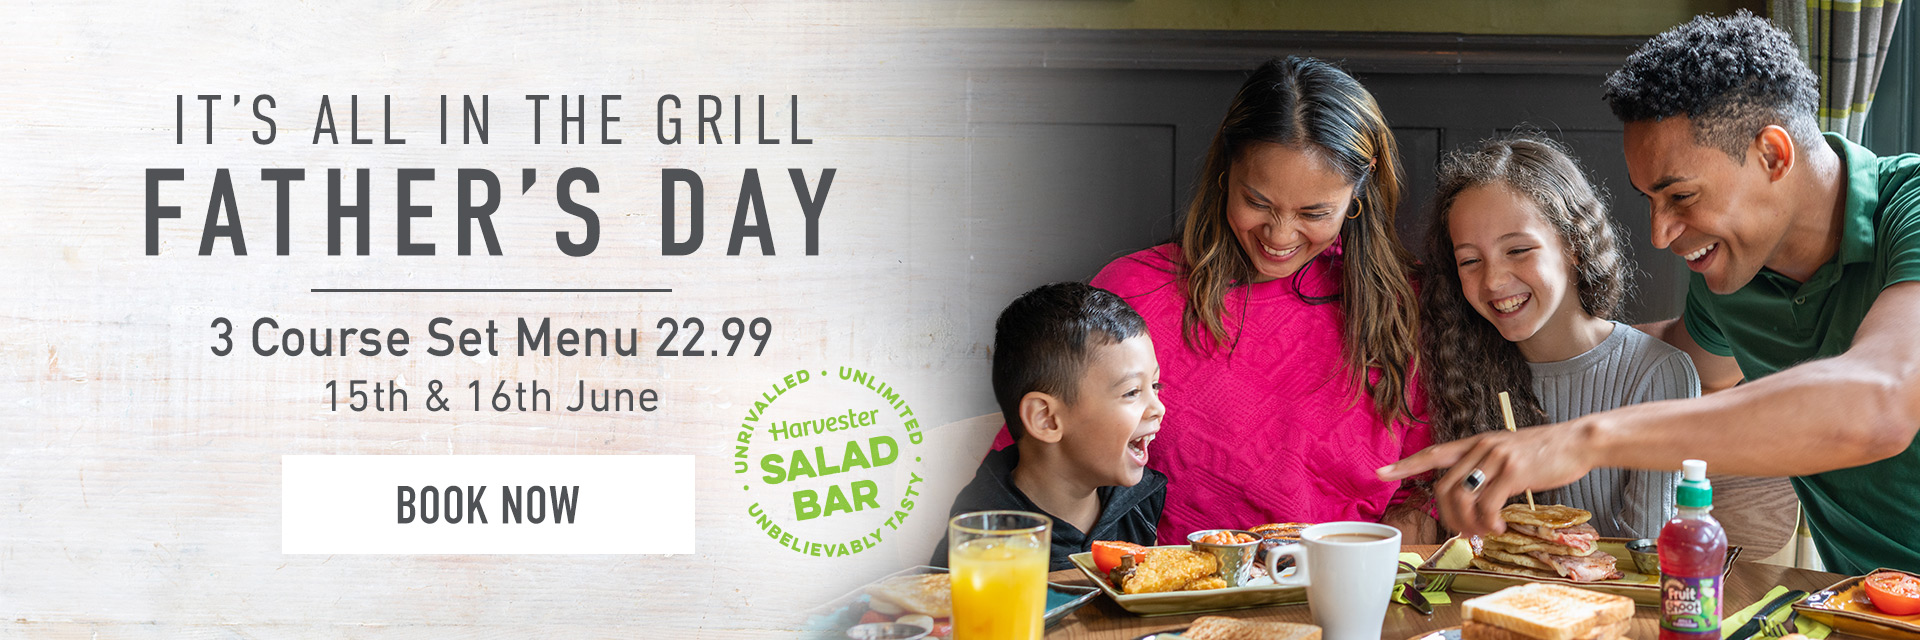 Father’s Day at Harvester Hillington